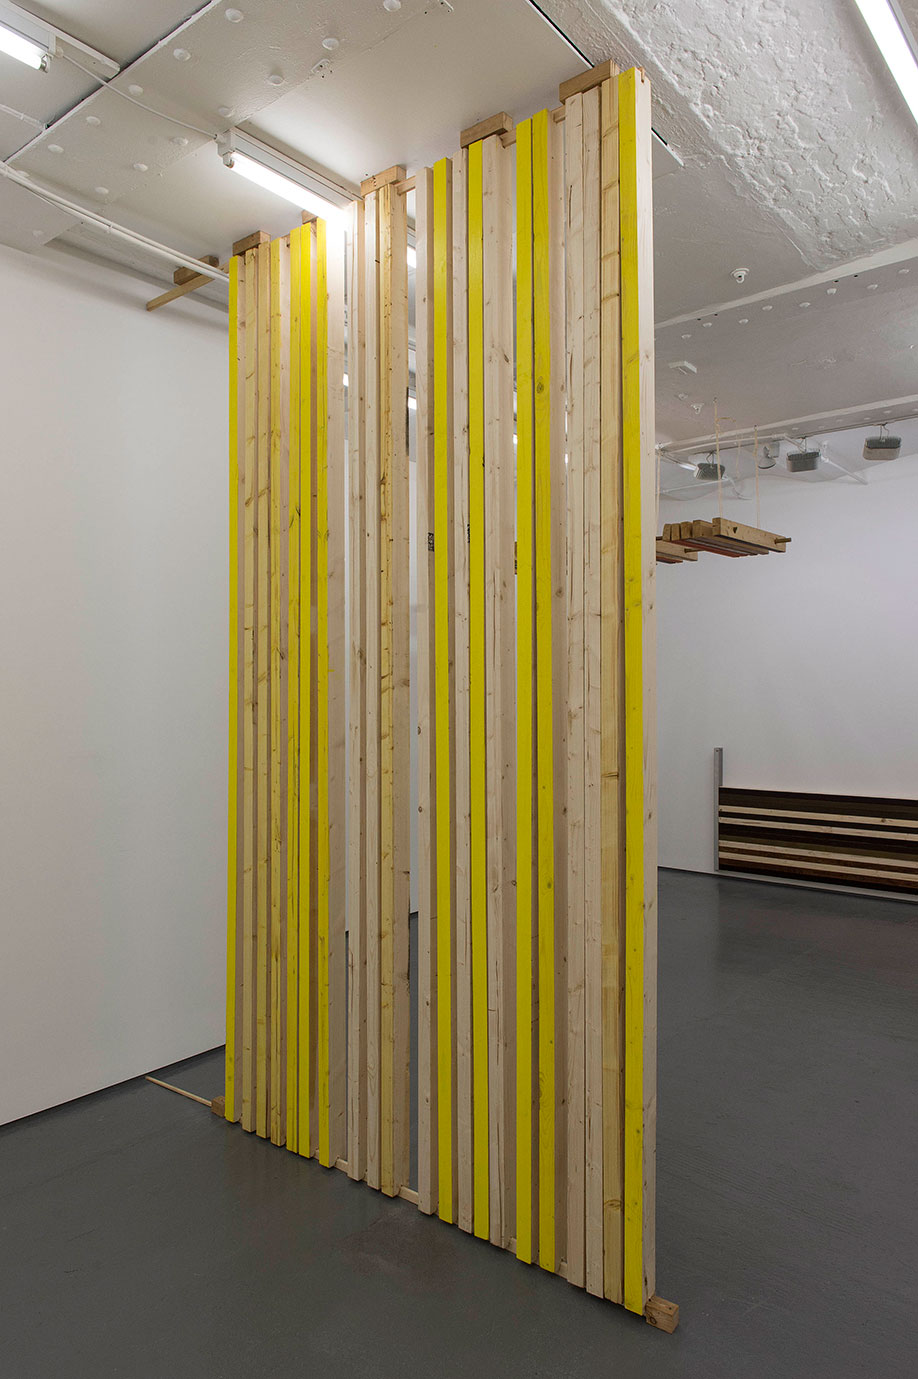 <b>Title: </b>Room Wood<br /><b>Year: </b>2015<br /><b>Medium: </b>Wood, metal and paint<br /><b>Size: </b>Dimensions variable